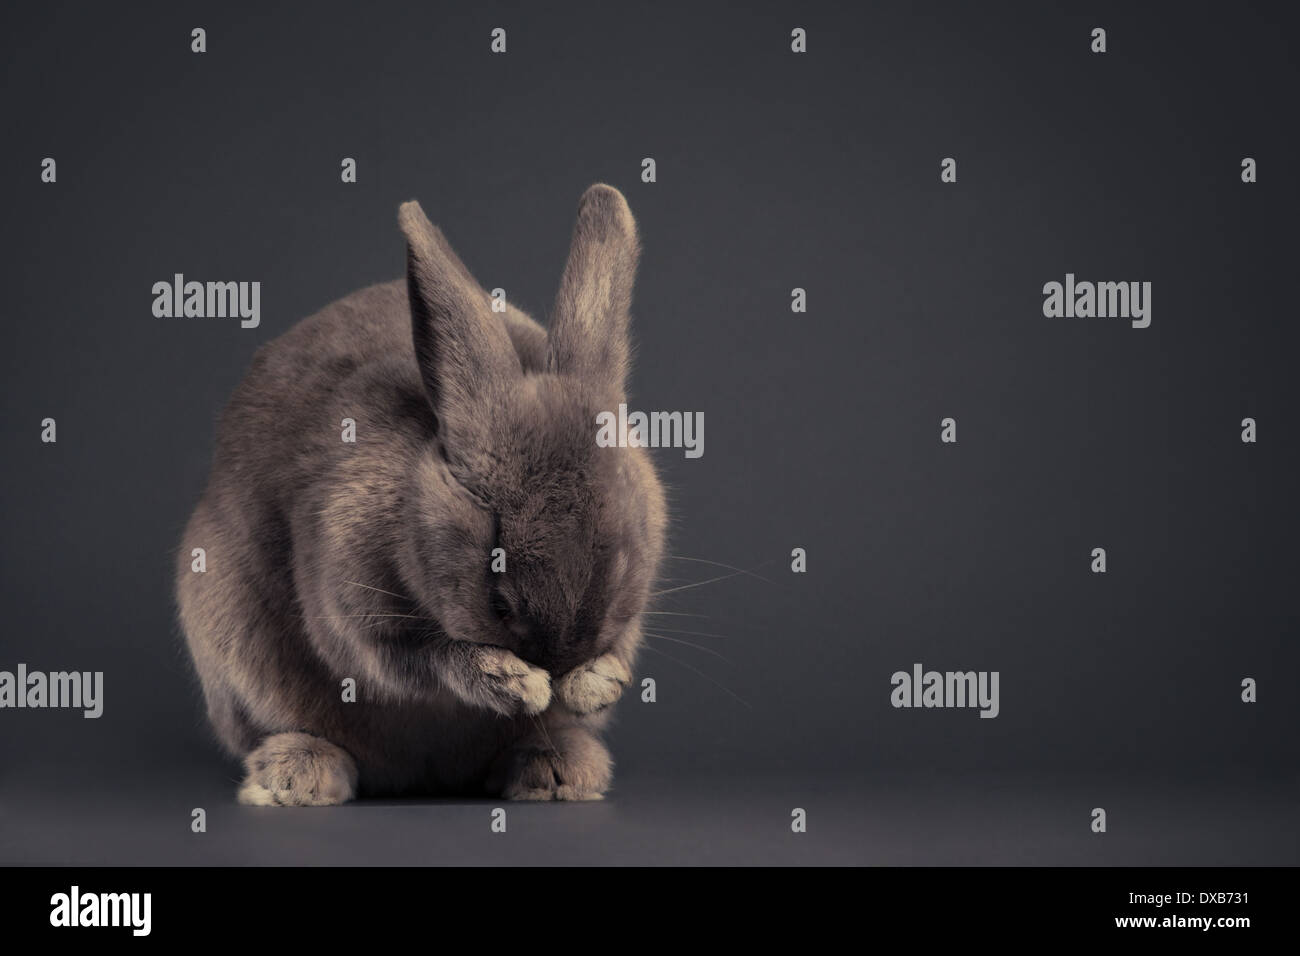 Bunny cleaning its face in studio. Stock Photo